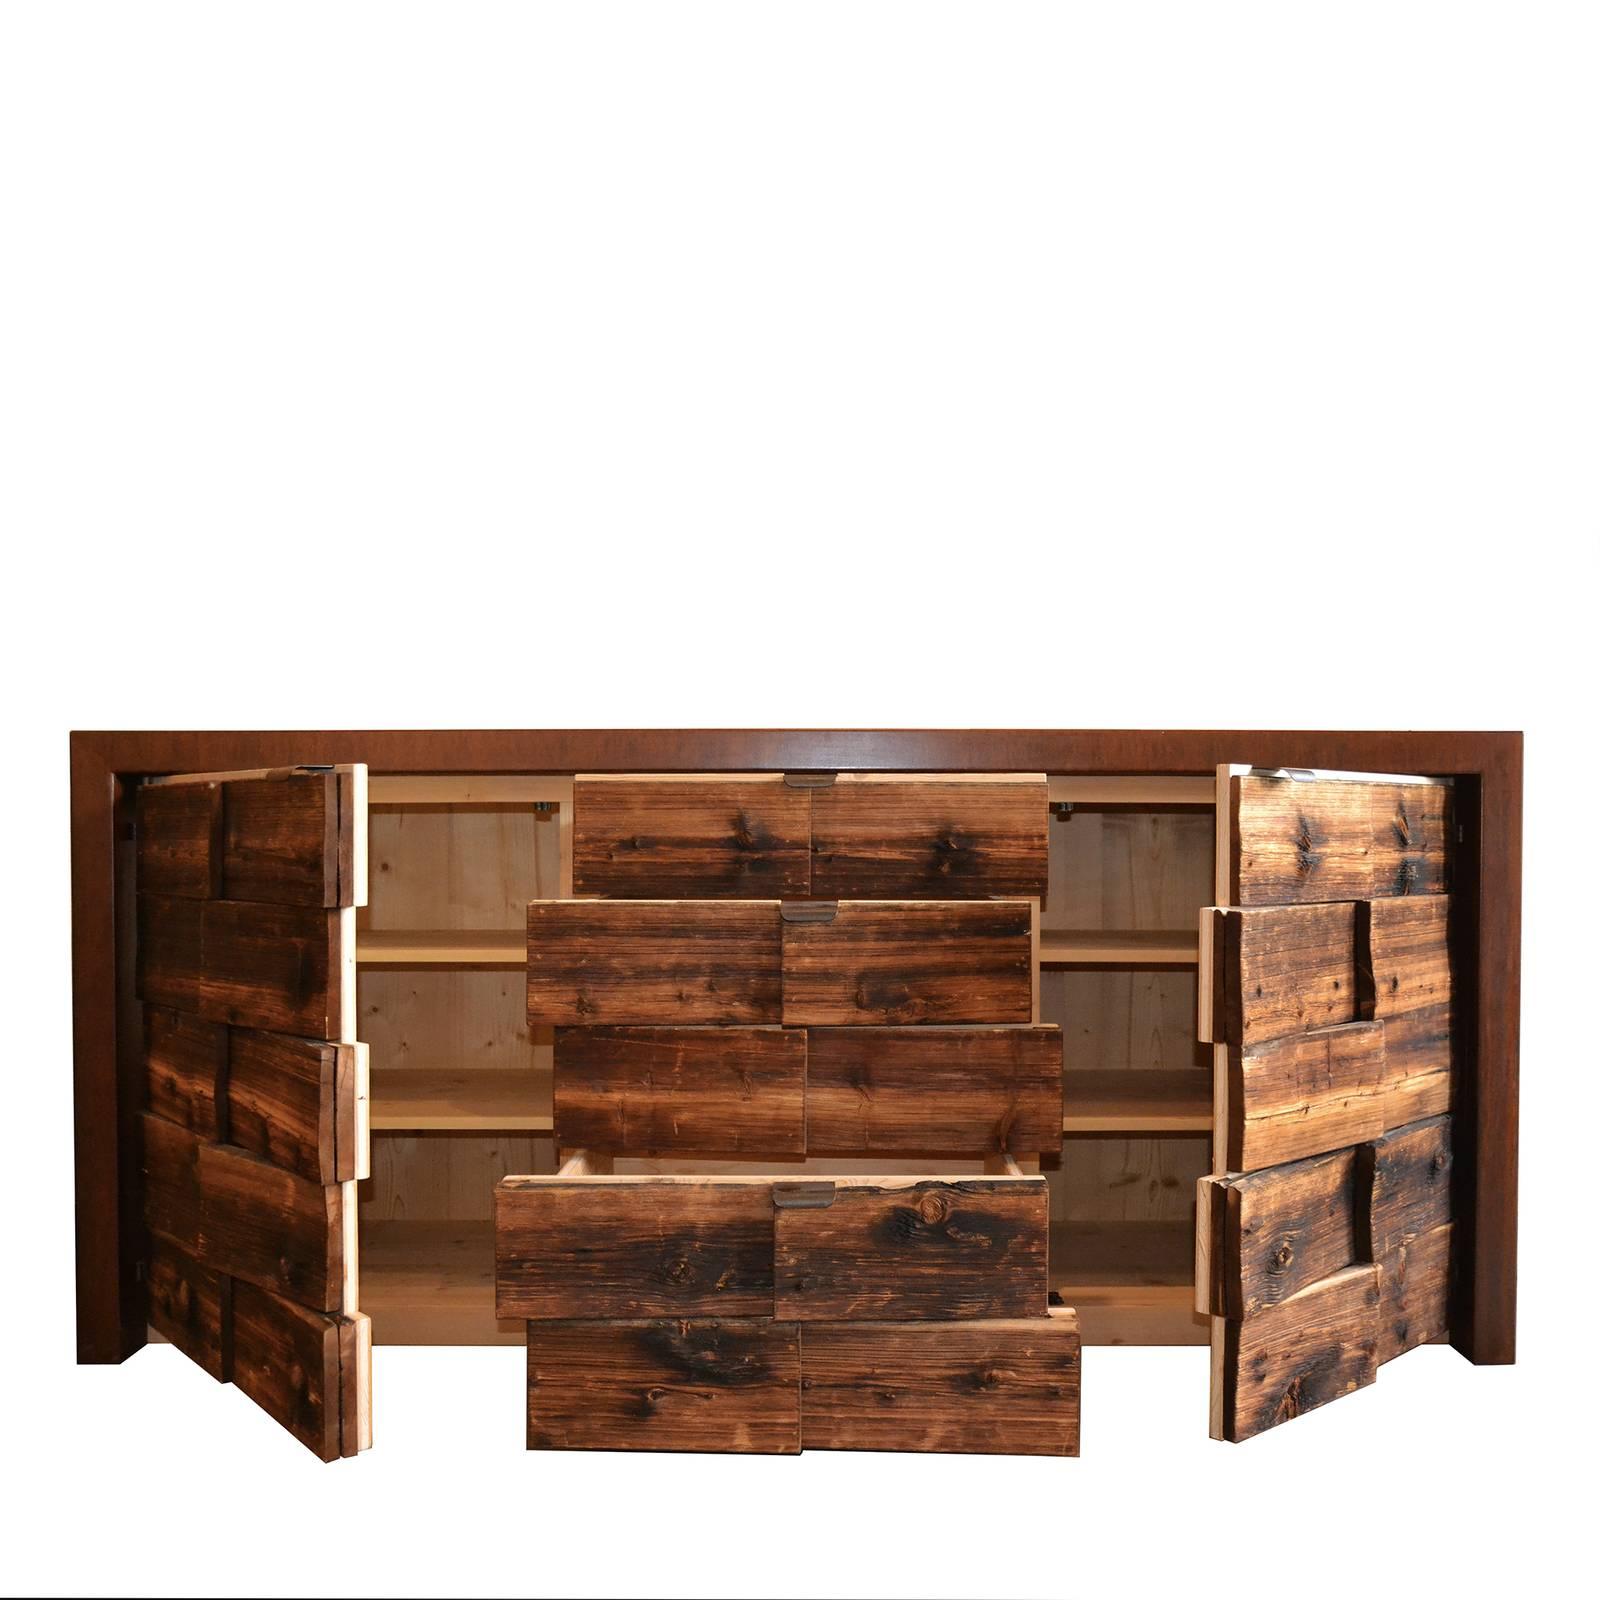 This stunning sideboard is a celebration of traditional craftsmanship and contemporary design and will enrich the look of a rustic or modern living room and dining room. Its front has three central drawers and two lateral doors, opening into a space